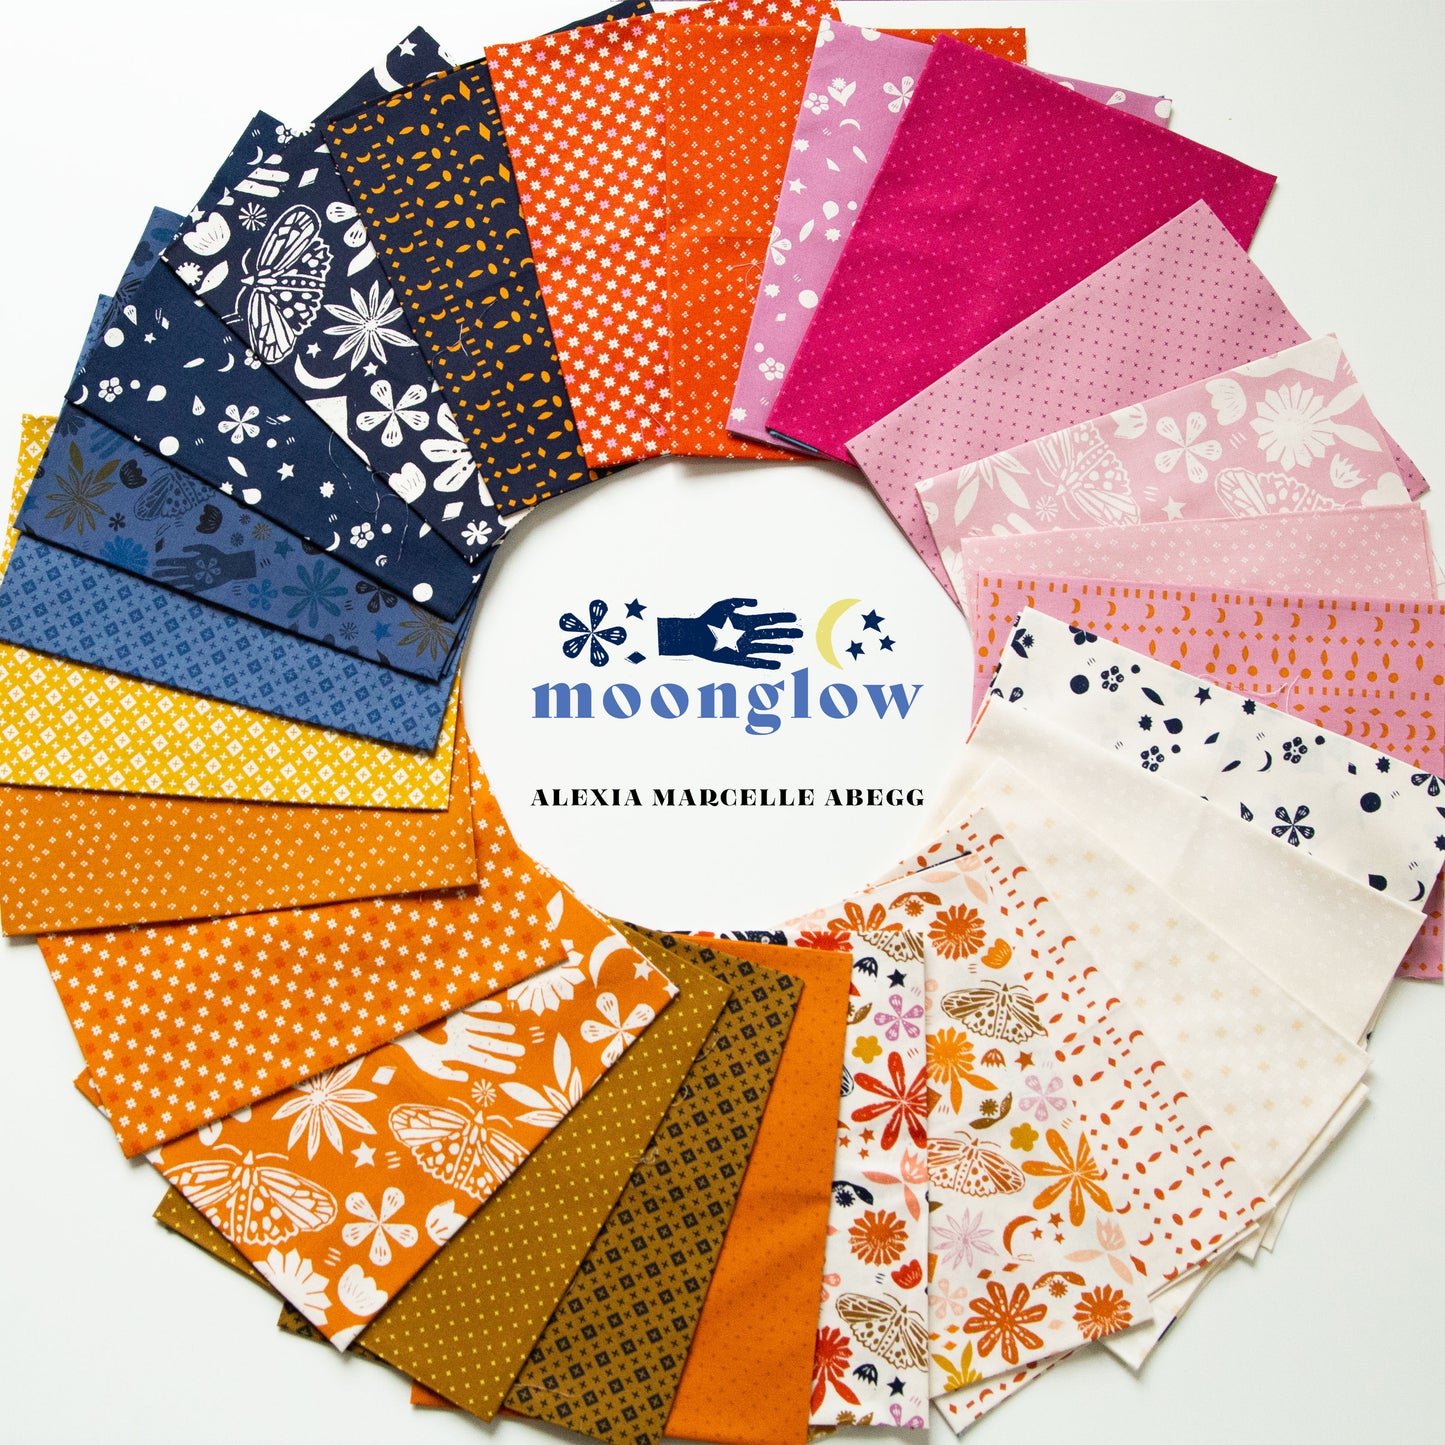 Moonglow Half Yard Bundle - Moonglow - Ruby Star Society - Alexia Abegg - Moda -  quilting cotton